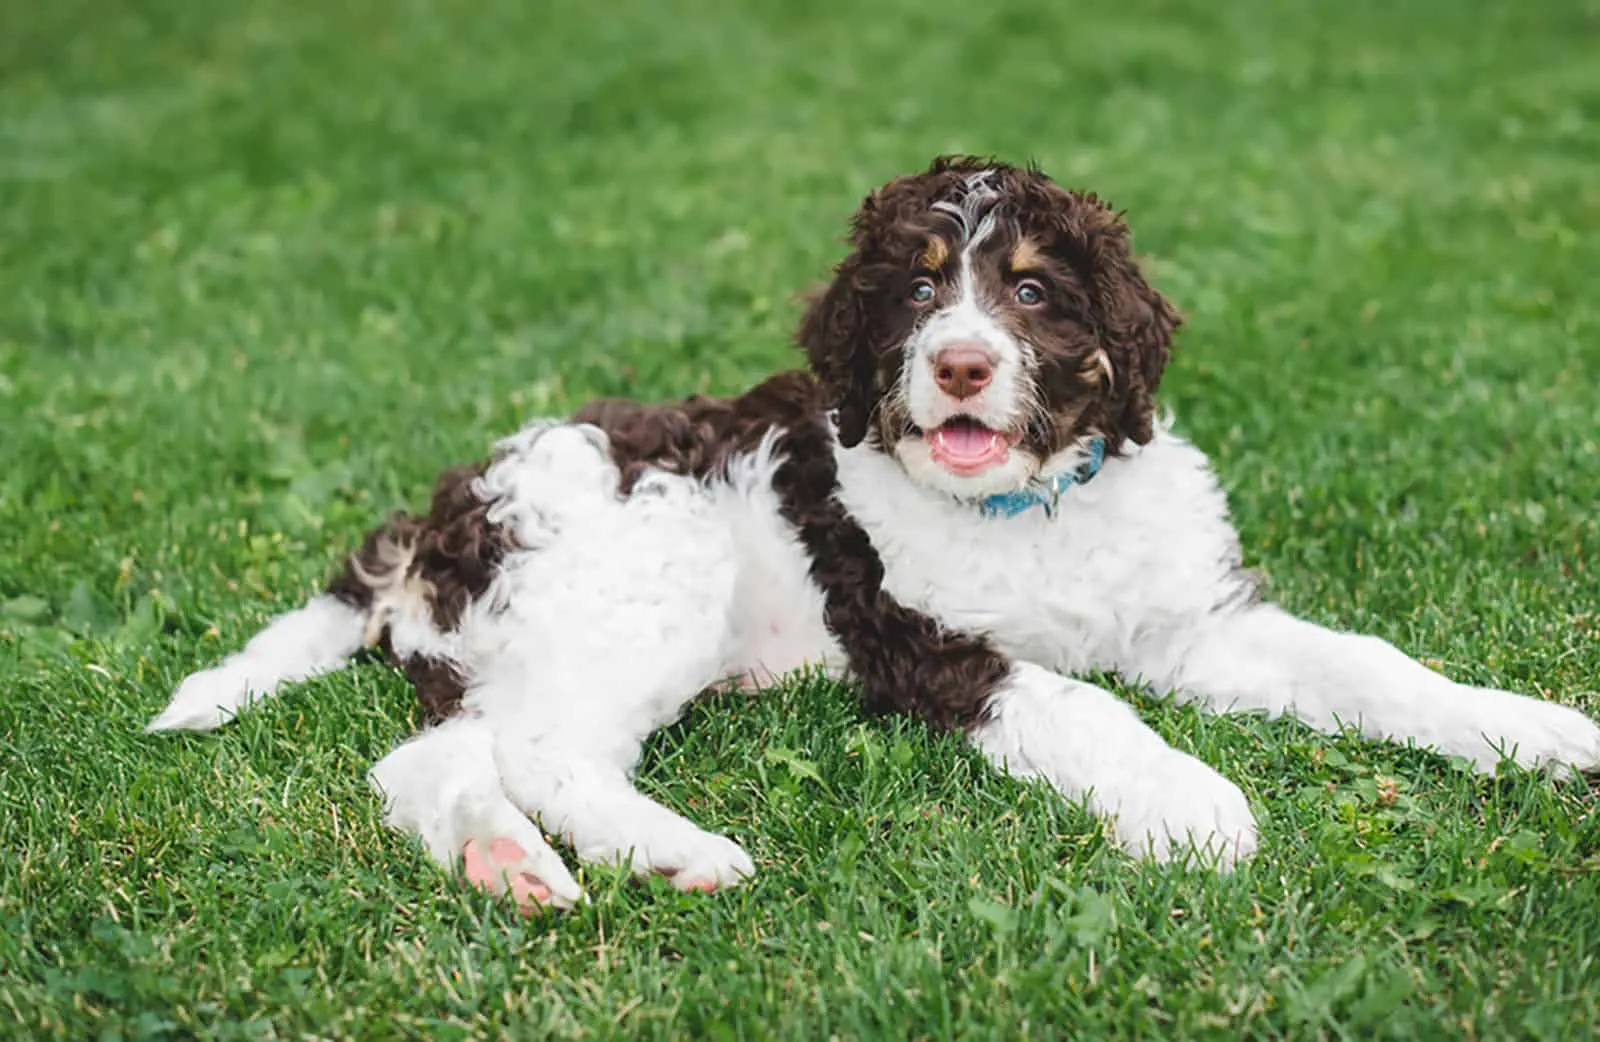 bernadoodle puppy lying on the lawn and posing